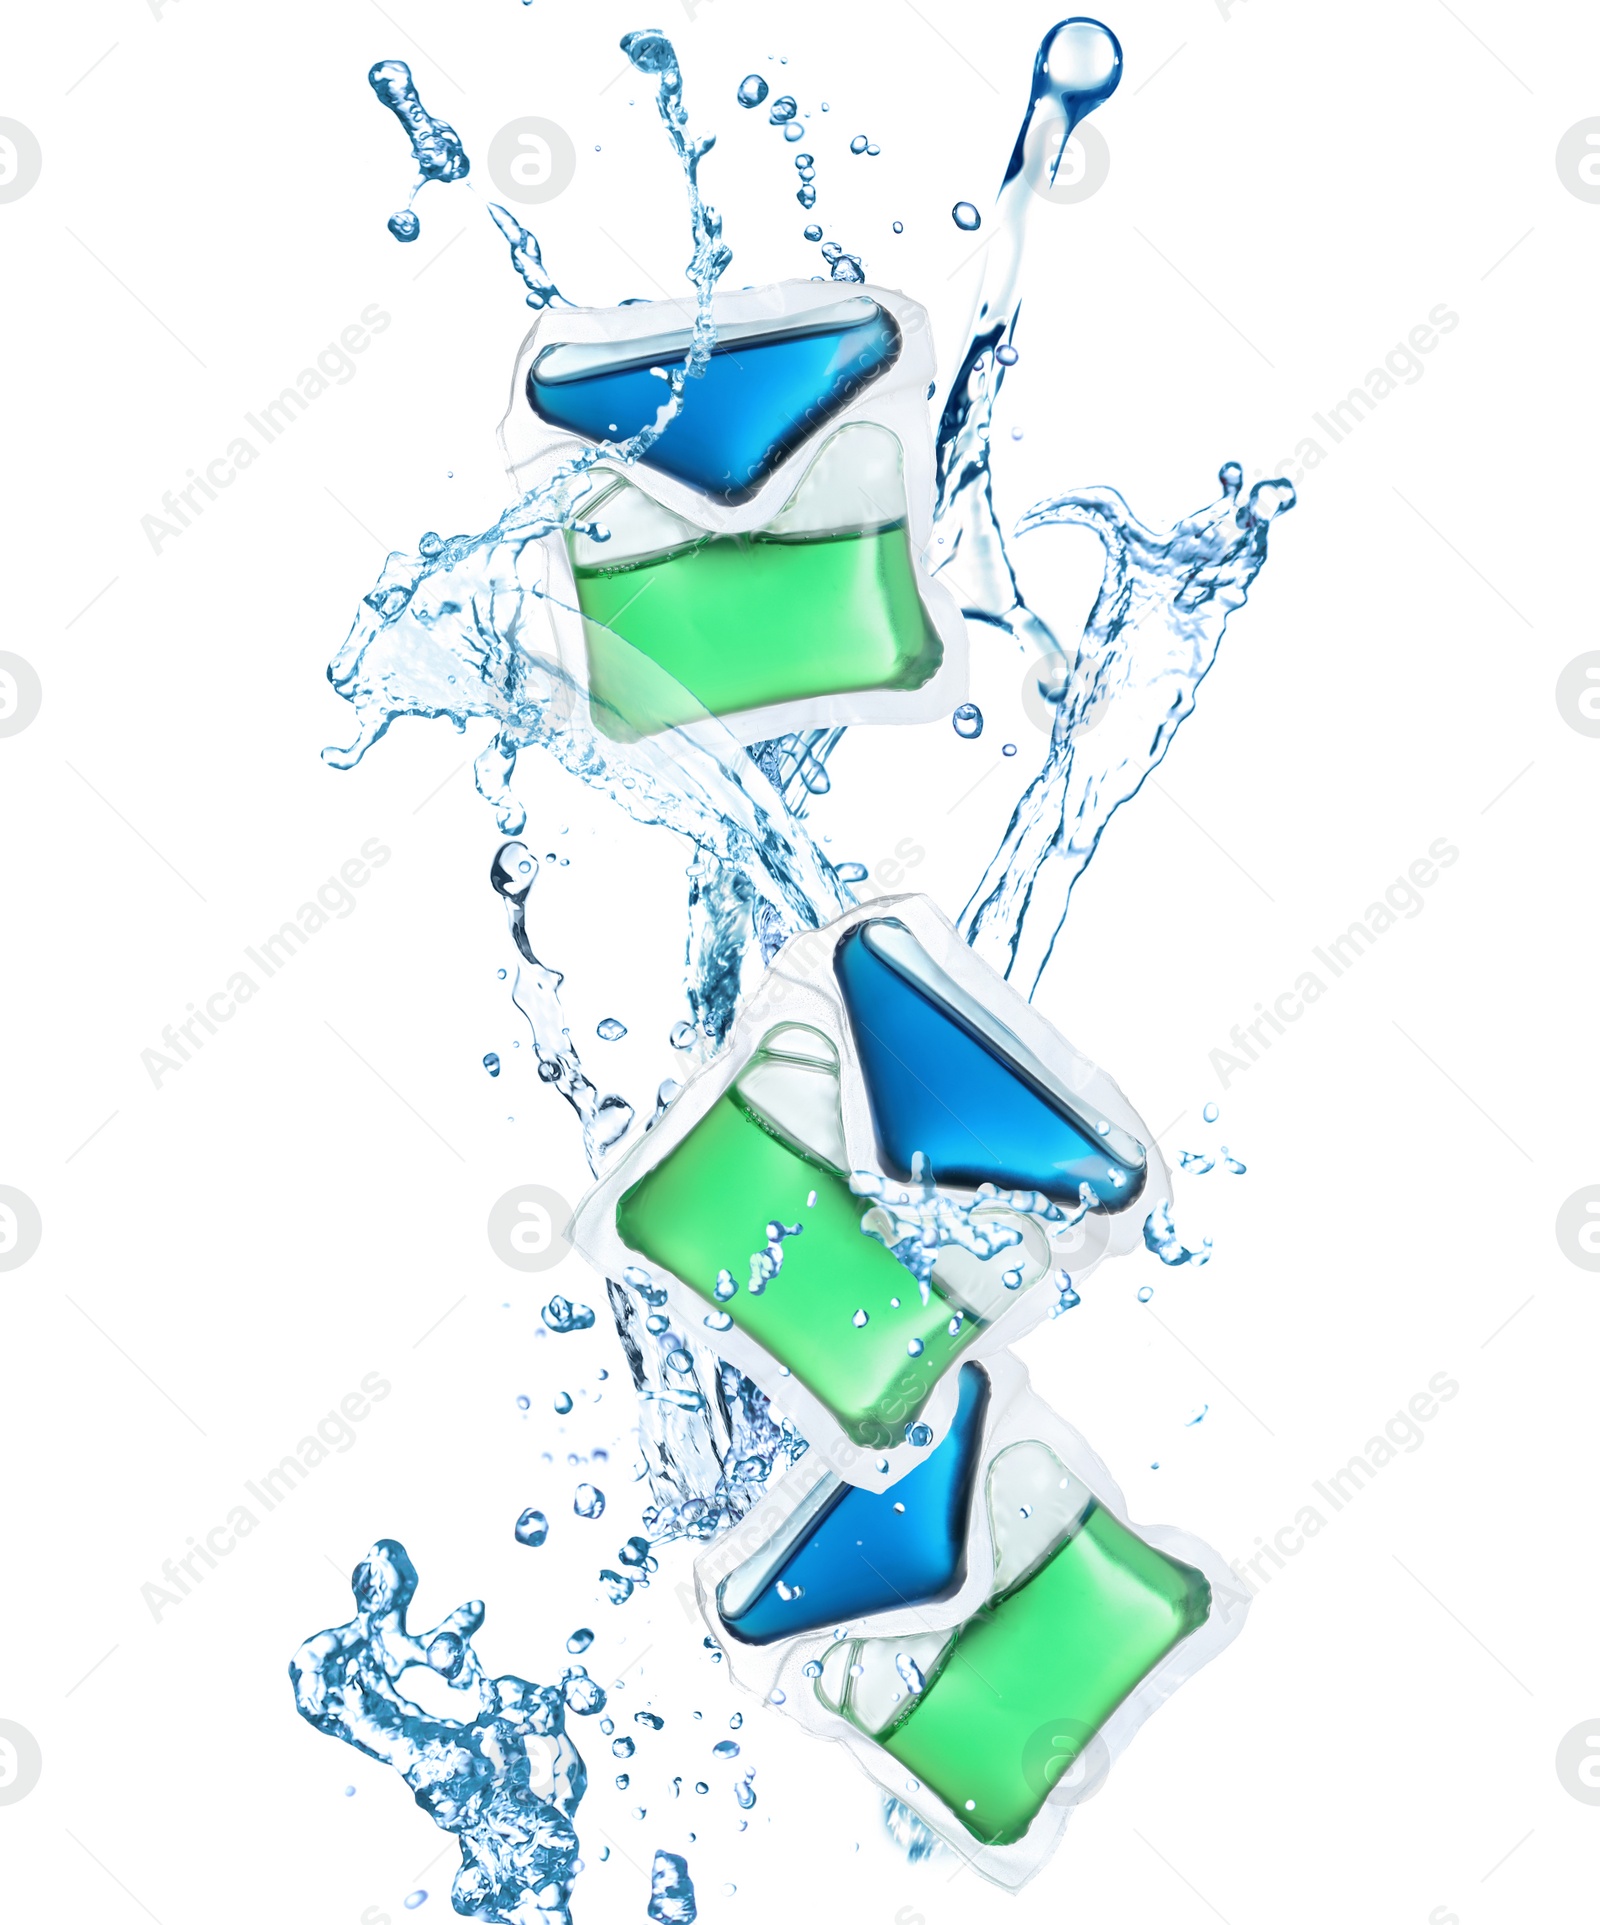 Image of Laundry capsules and splashing water on white background. Detergent pods